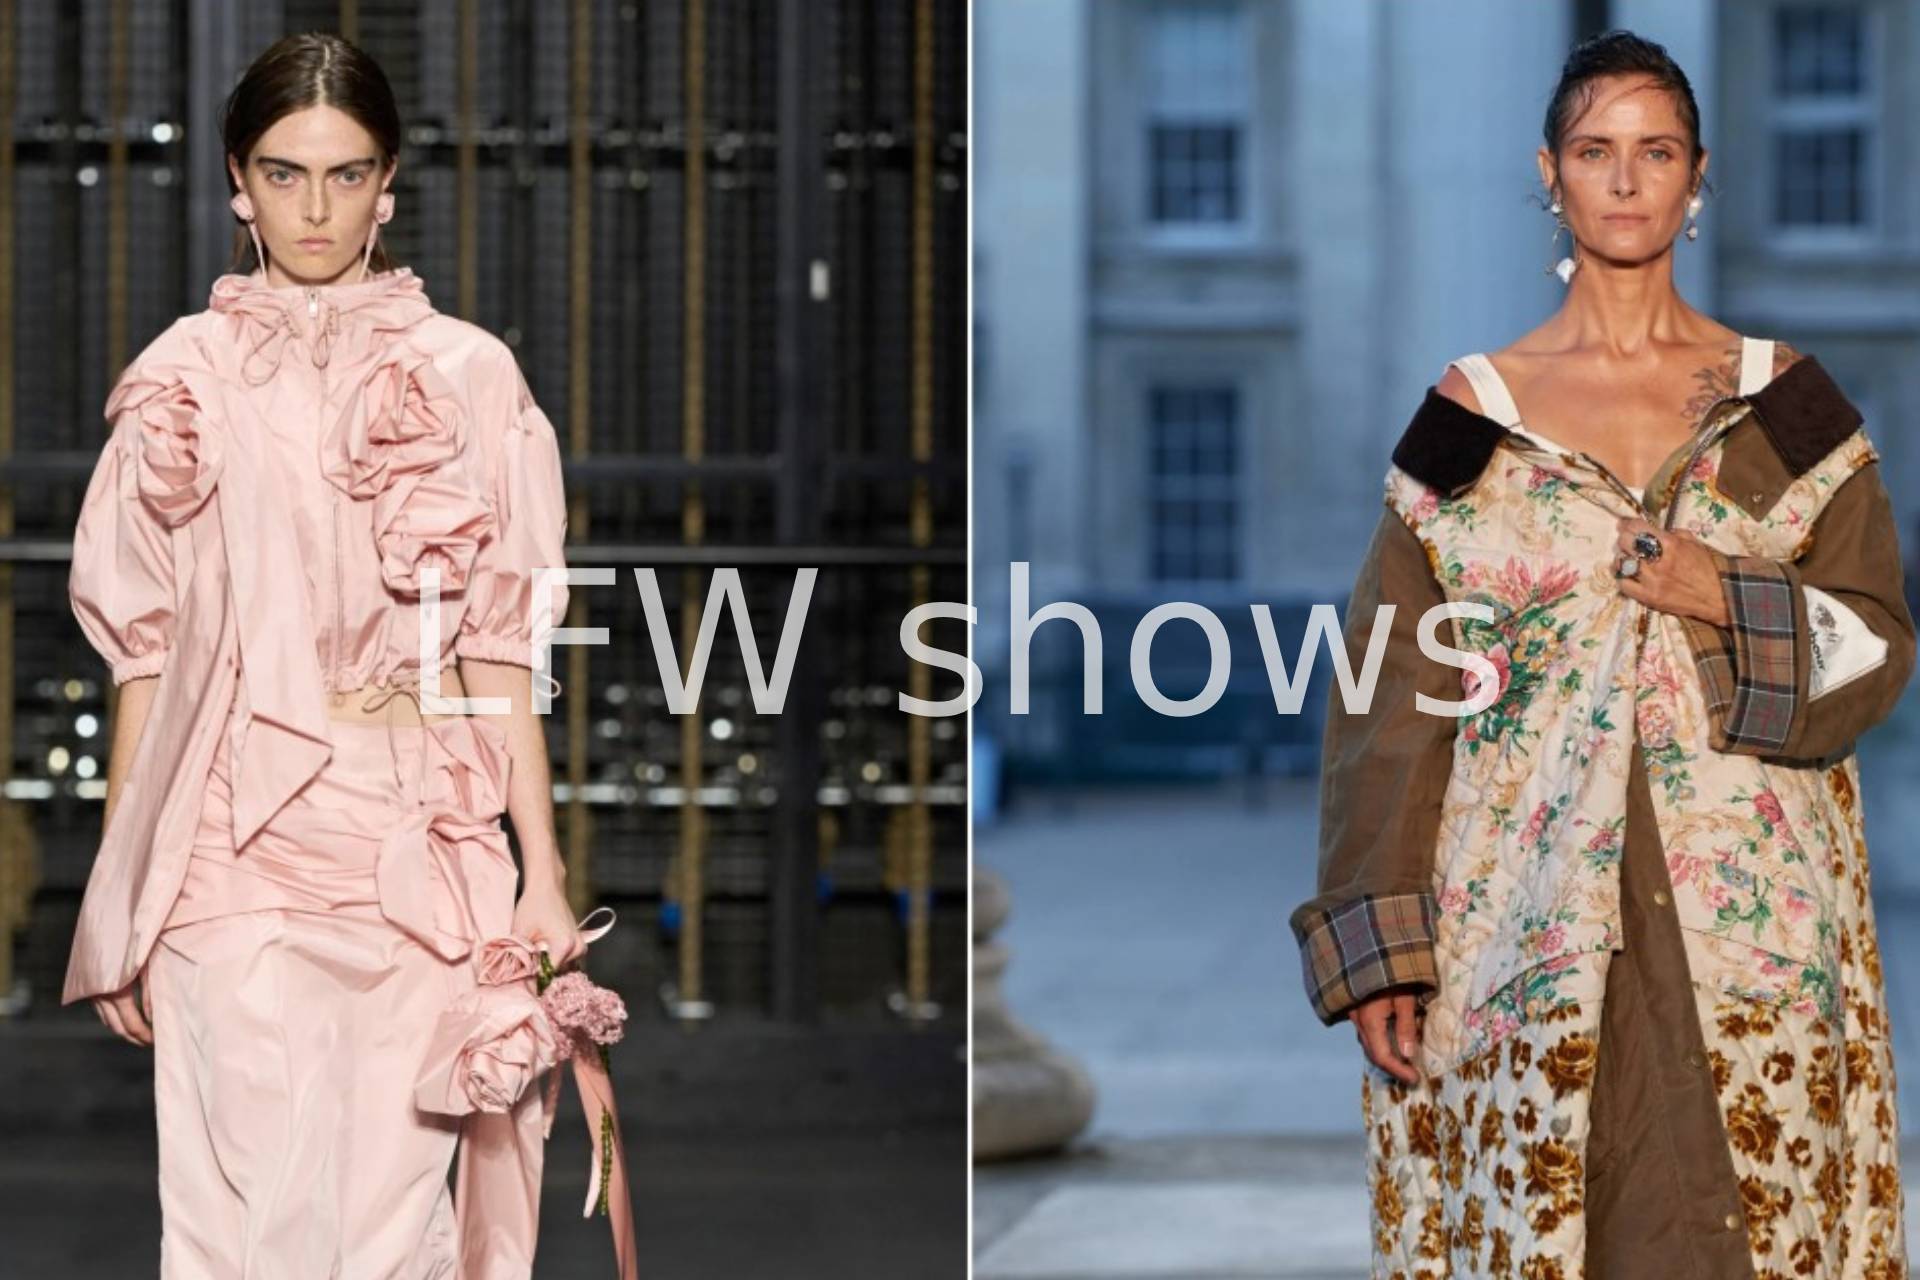 LFW: What did we see at the shows?